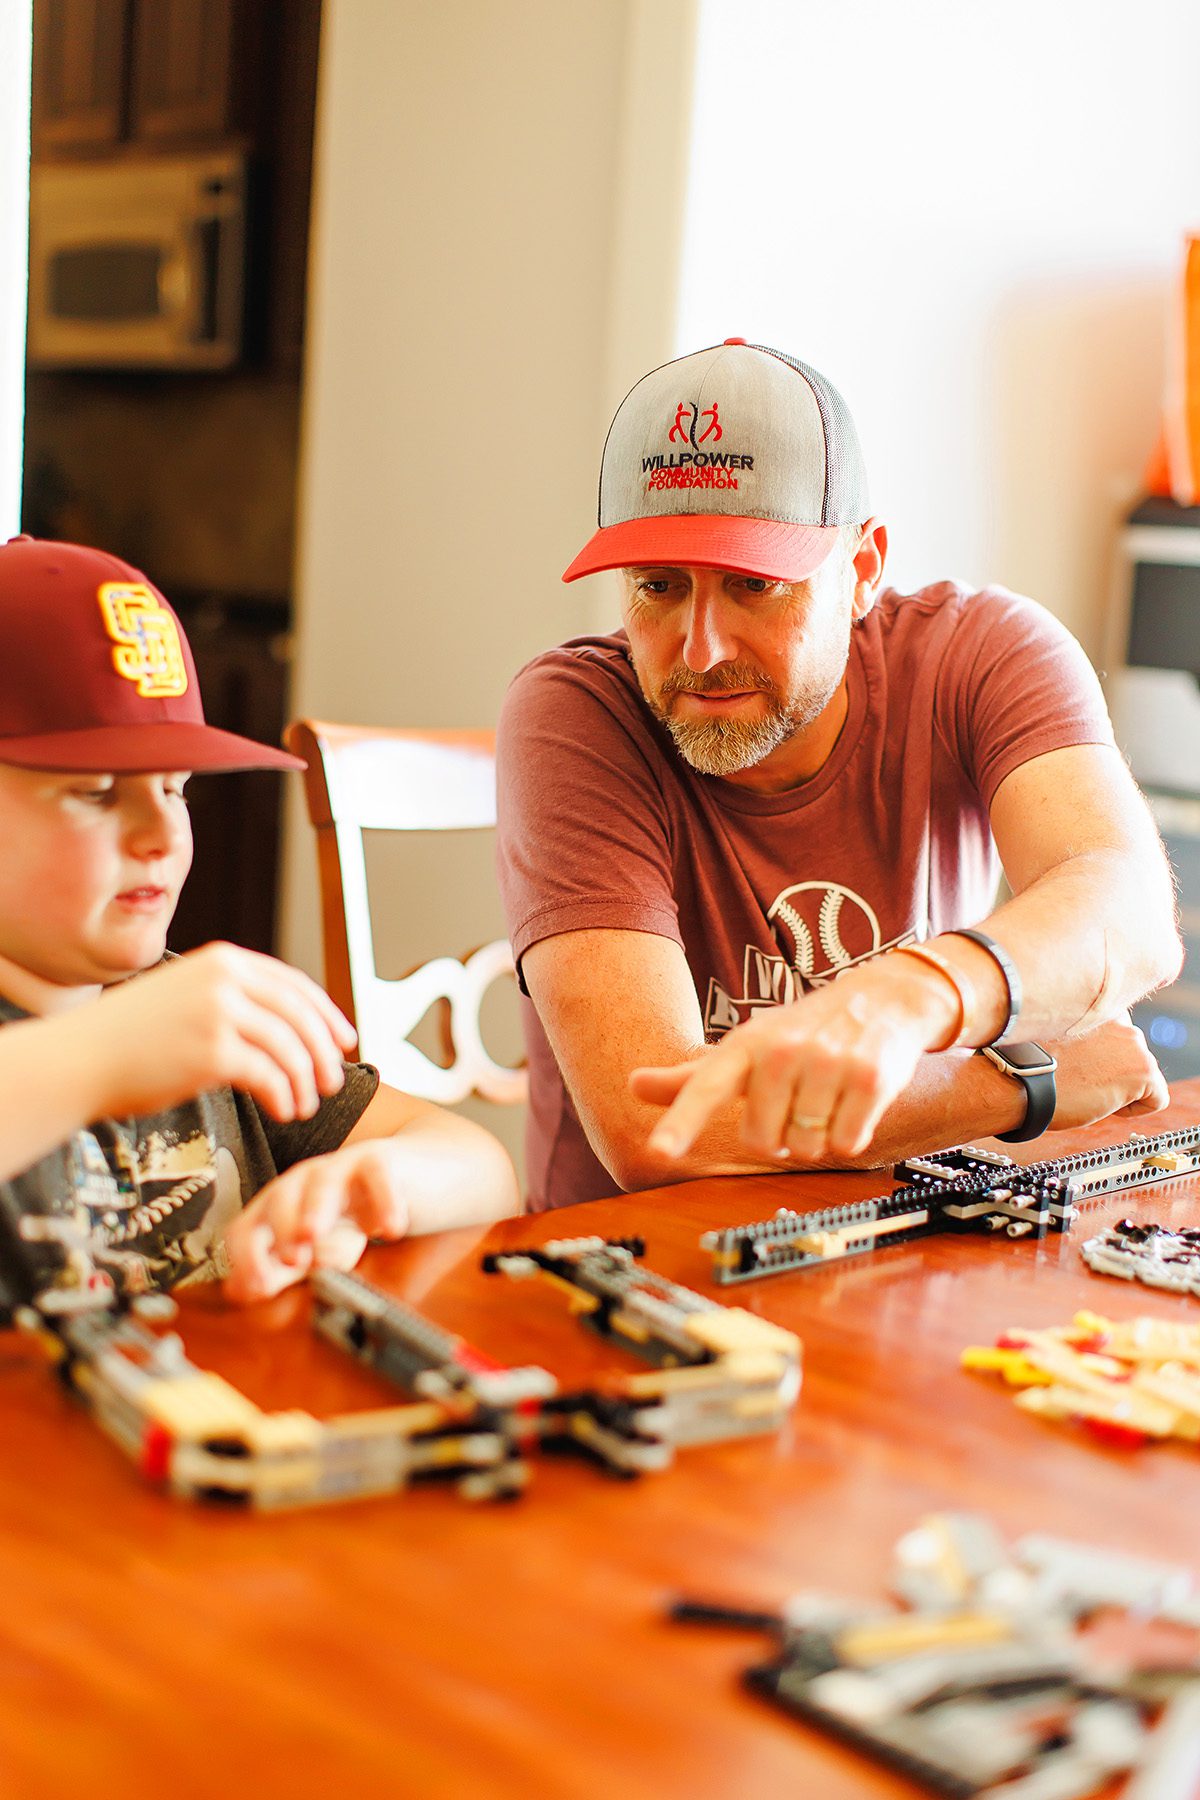 Tim Allen of WillPower baseball playing legos with his son, Will